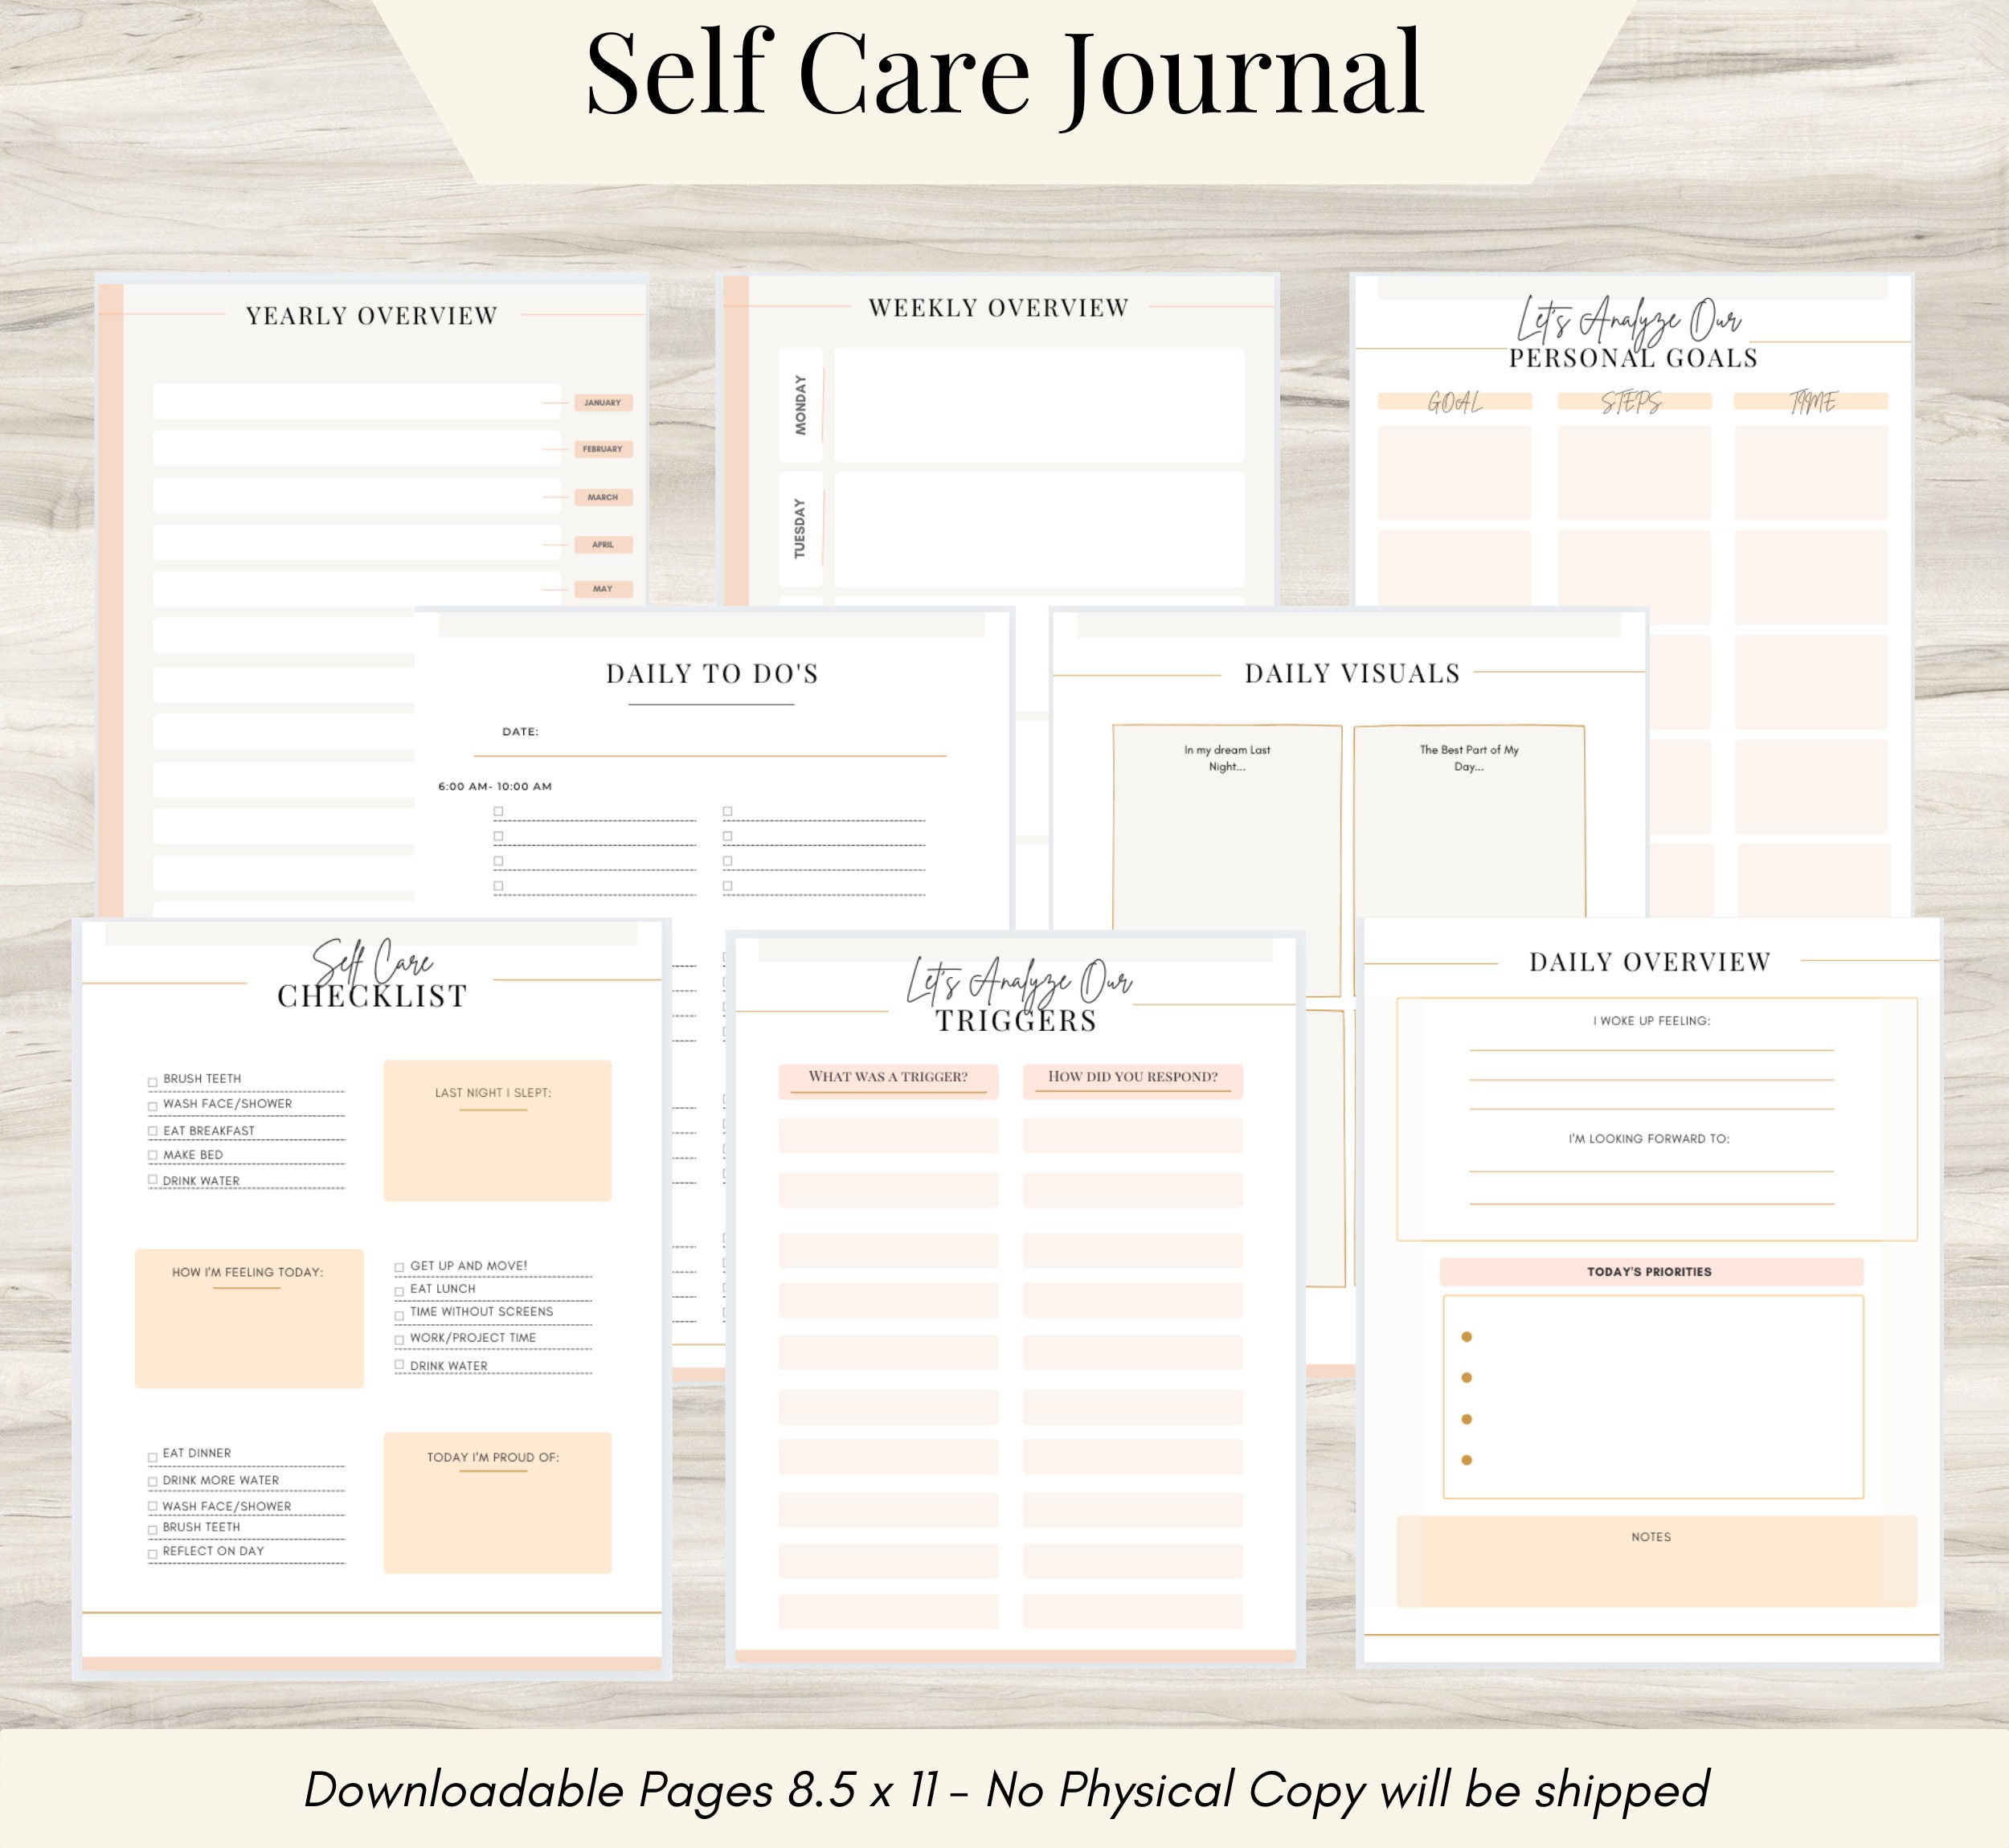 Living the Life I always Dreamed Of: Self Care Journal for Girls ages 8-12,  Monthly Planner, Homework Tracker: Bedford, Laurie: 9798423898793:  : Books